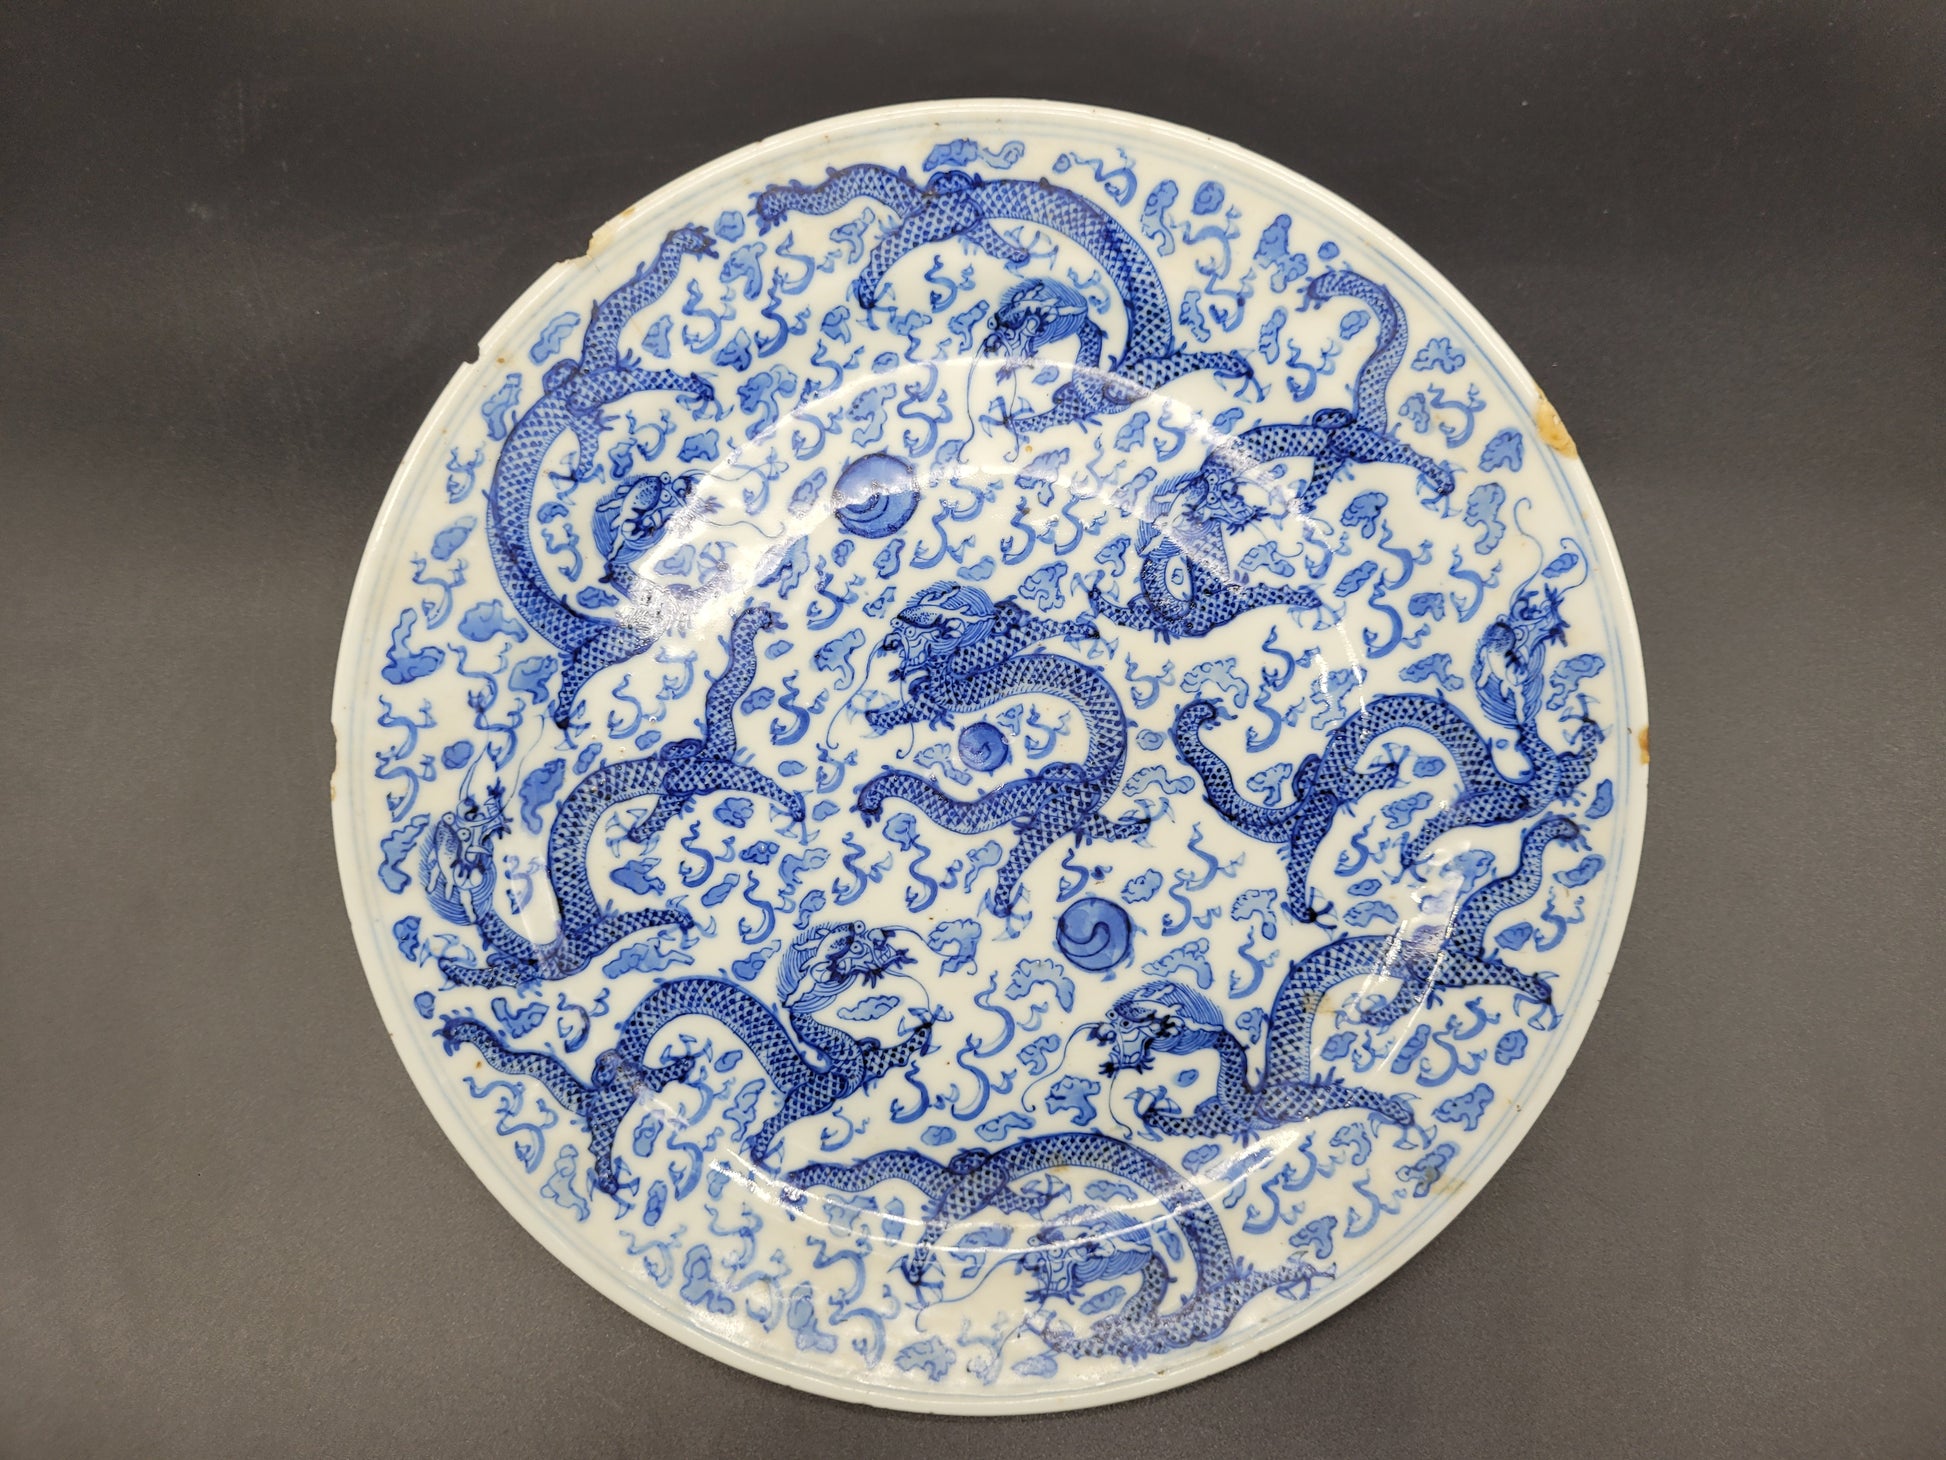 ANTIQUES ONLINE USA Beautiful Chinese Kangxi Period ( 1662-1722 ) Blue and White Dragon Plate 